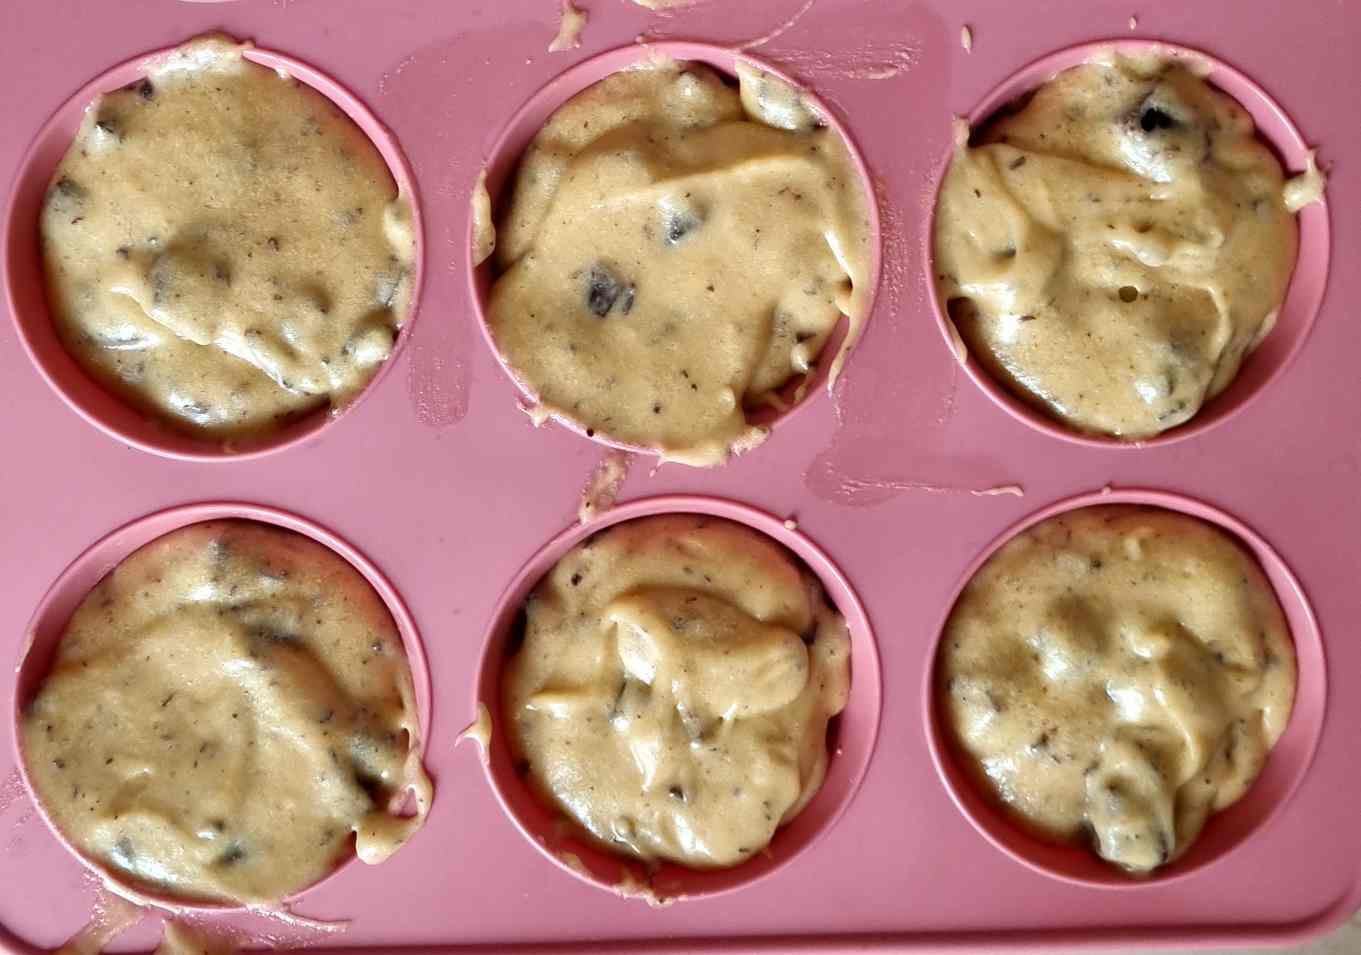 Fill the muffin tin with gluten free muffin batter